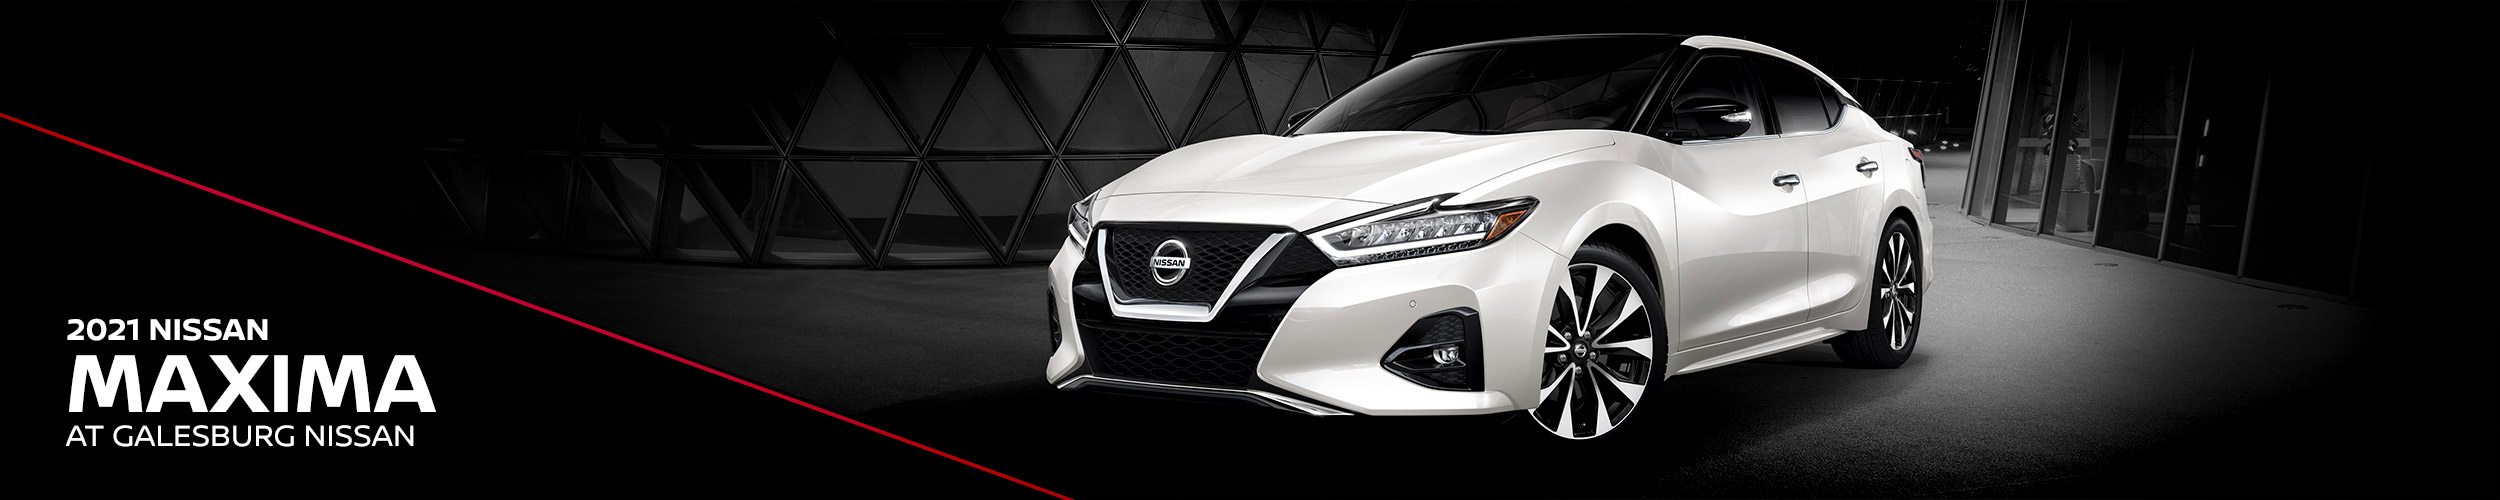 2021 Nissan Maxima At Galesburg Nissan in Galesburg, IL